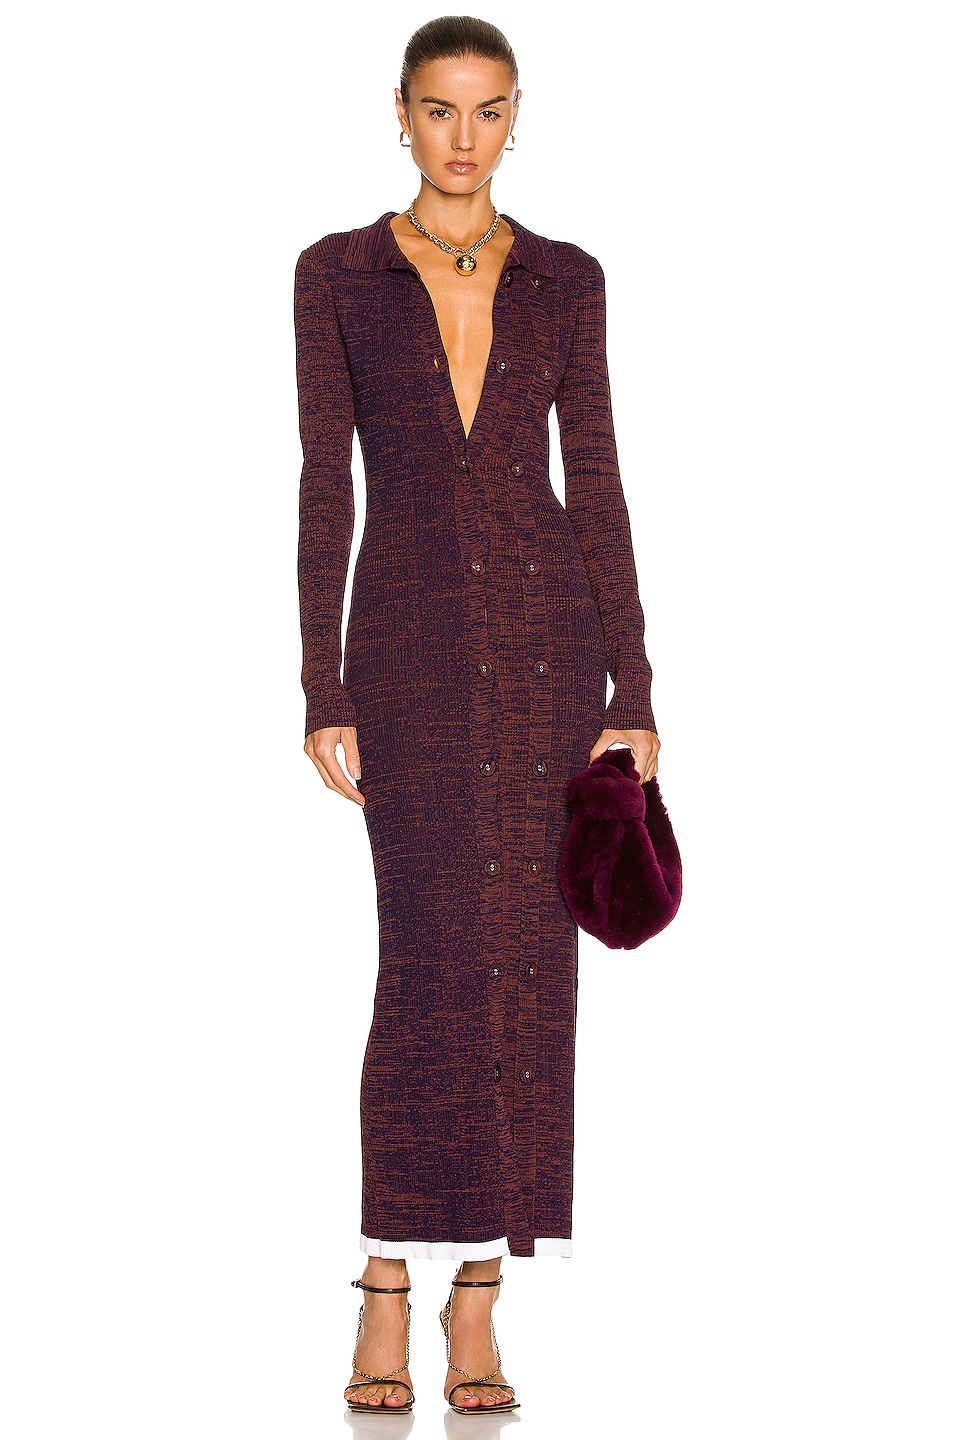 Image 1 of Christopher Esber Elongated Double Button Cardigan Dress in Navy Maroon Marle